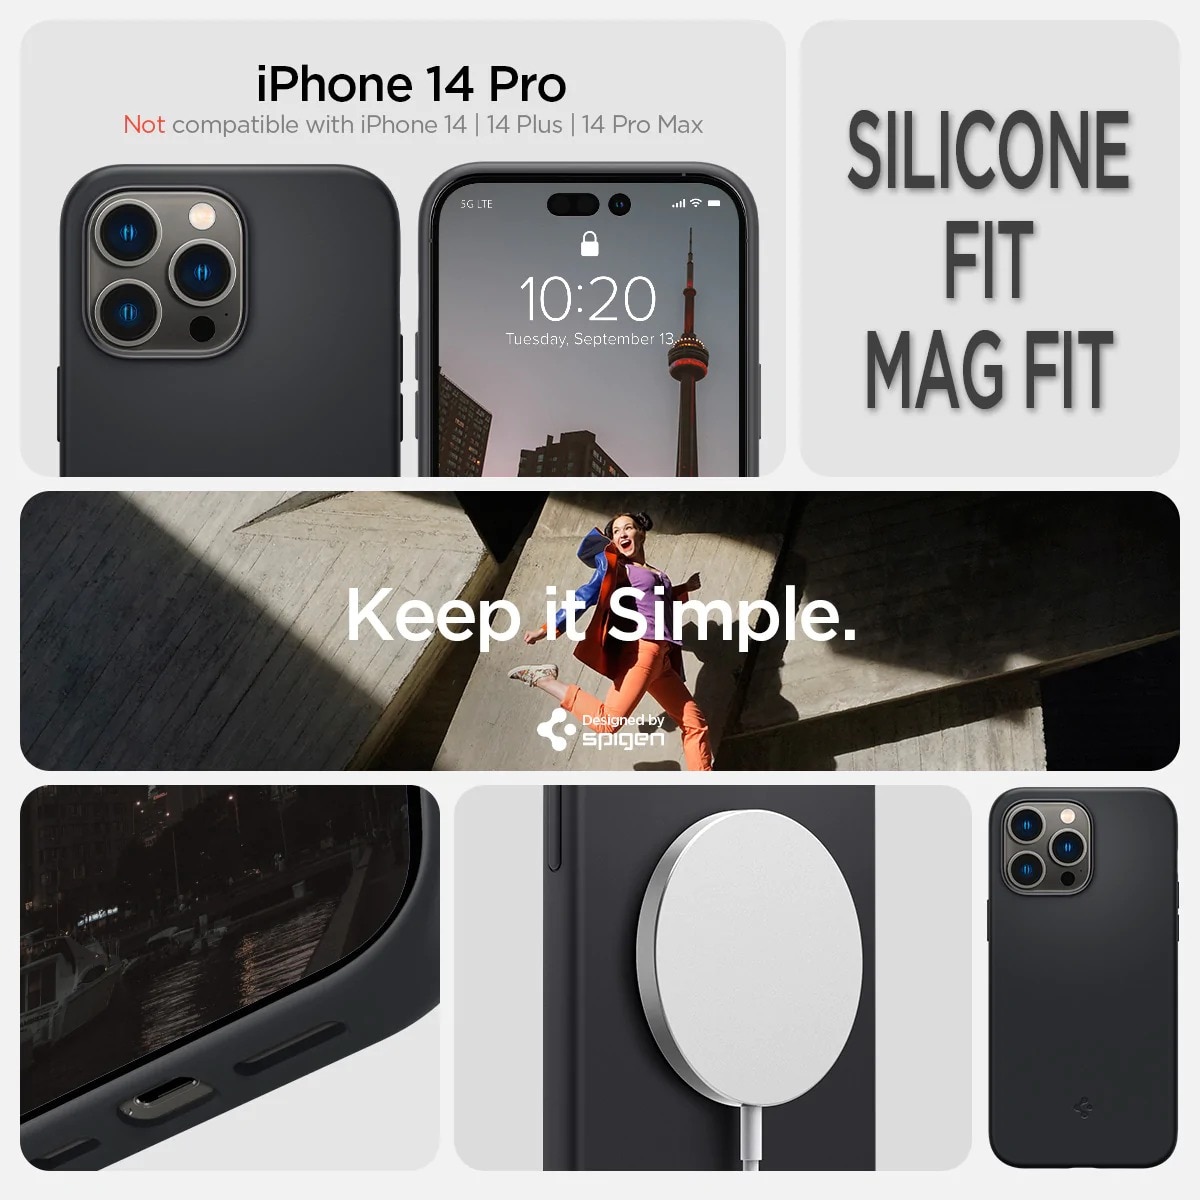 Case Silicone Fit Mag iPhone 14 Pro Max Zwart